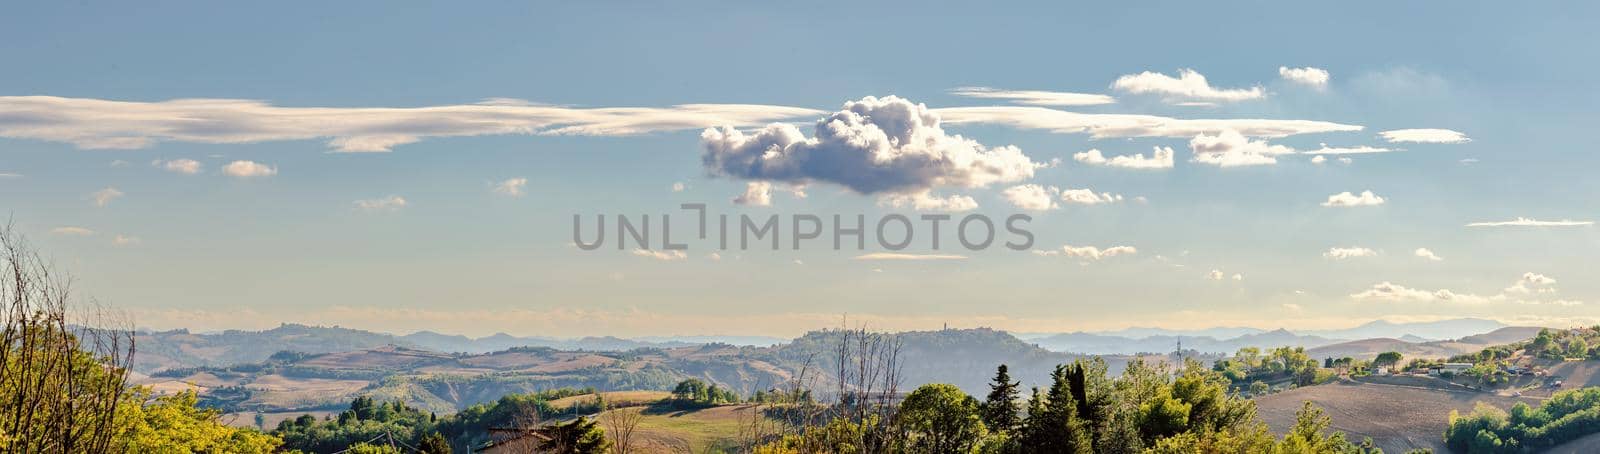 View of the Montefeltro hills and mountains from Belvedere Fogliense in the Marche region of Italy by MaxalTamor